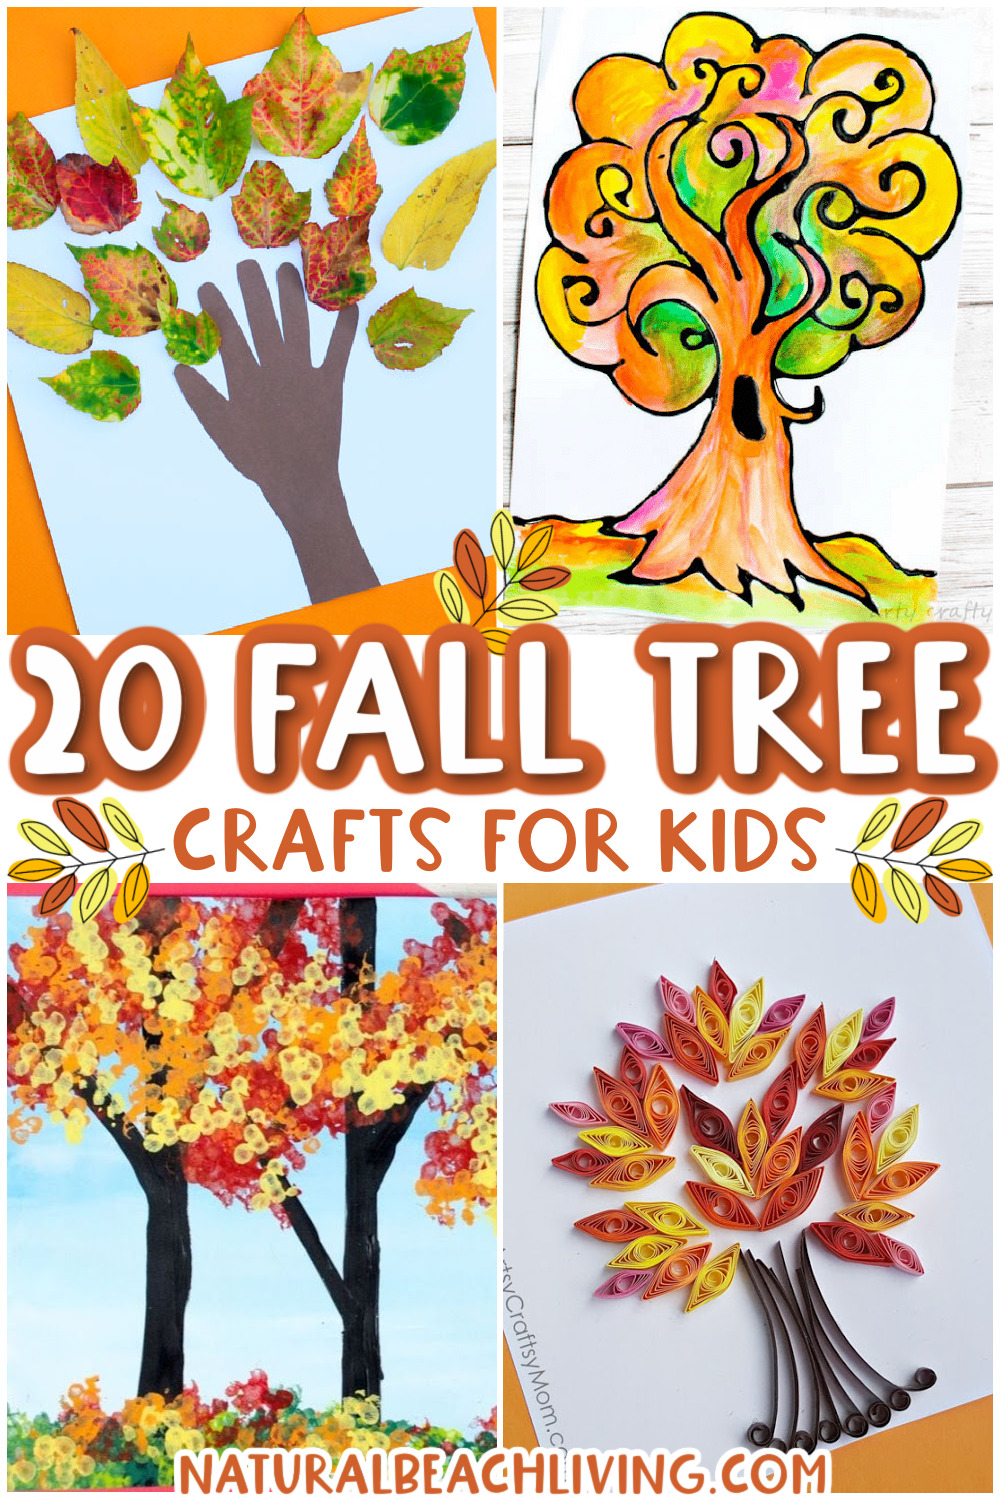 20 gorgeous fall tree craft ideas for kids. From a tree made with painted puzzle pieces to 3D autumn trees that pop off the page, these fall tree crafts are sure to delight kids of all ages. Preschool arts and crafts ideas for the entire fall season 